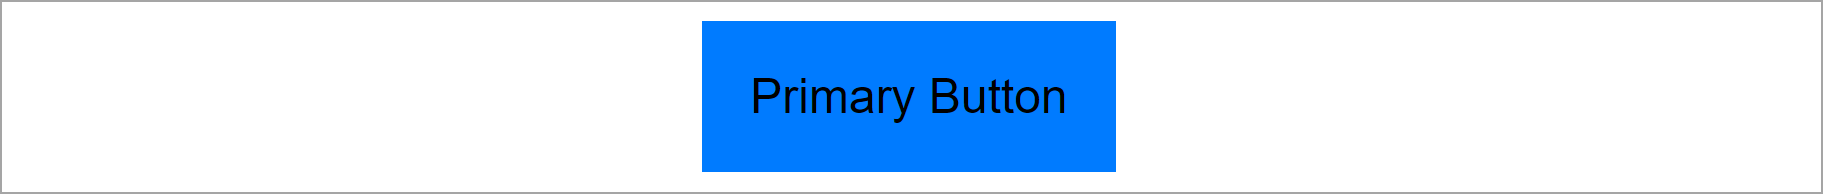 A primary button style based on the theme.